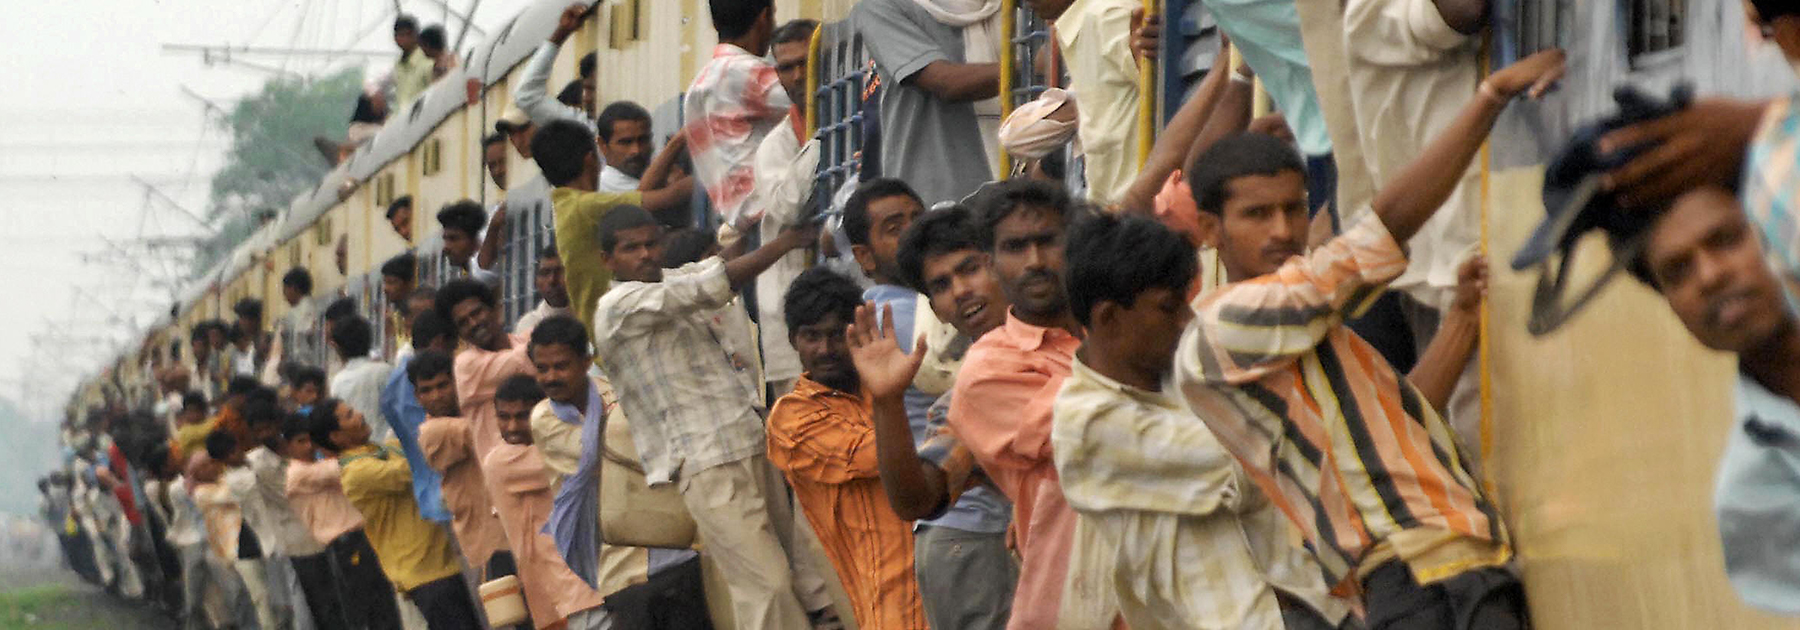 Commuters overcrowd a local passenger train on the Patna-Gaya railway track in Patna. (STR/AFP/Getty Images)